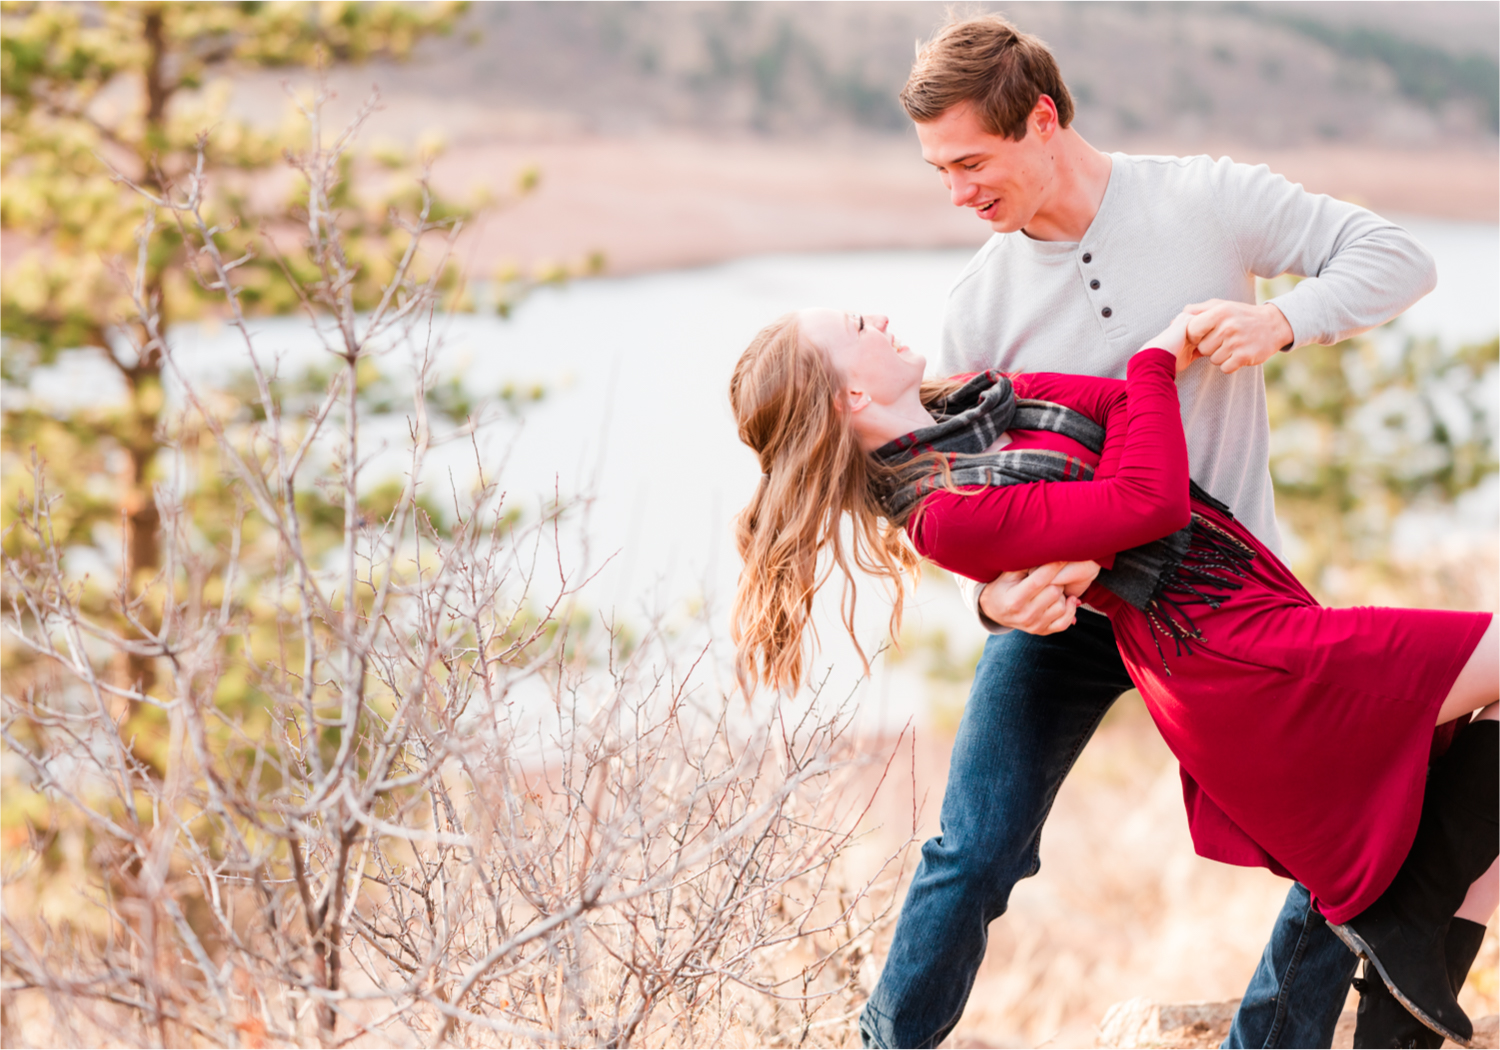 Winter Horsetooth Reservoir Engagement | Colorado Wedding Photographer and Videographer | Britni Girard Photography | Wedding and Engagement Films | Dancing, Cuddles, Chilly weather for this Rocky Mountain Engagement in Fort Collins